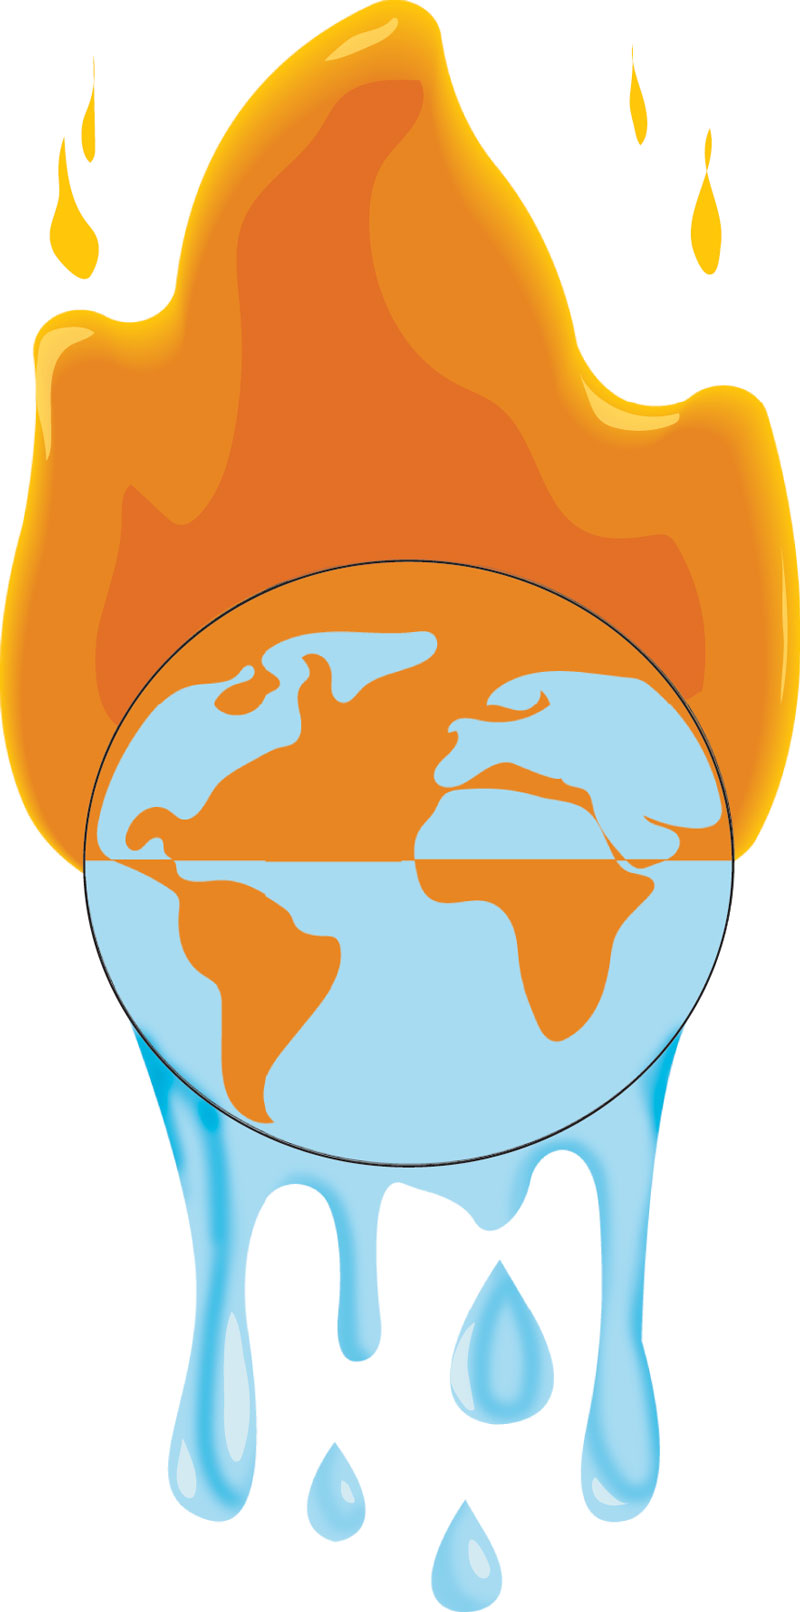 Graphic representing the Earth melting from the bottom and on fire at the top.